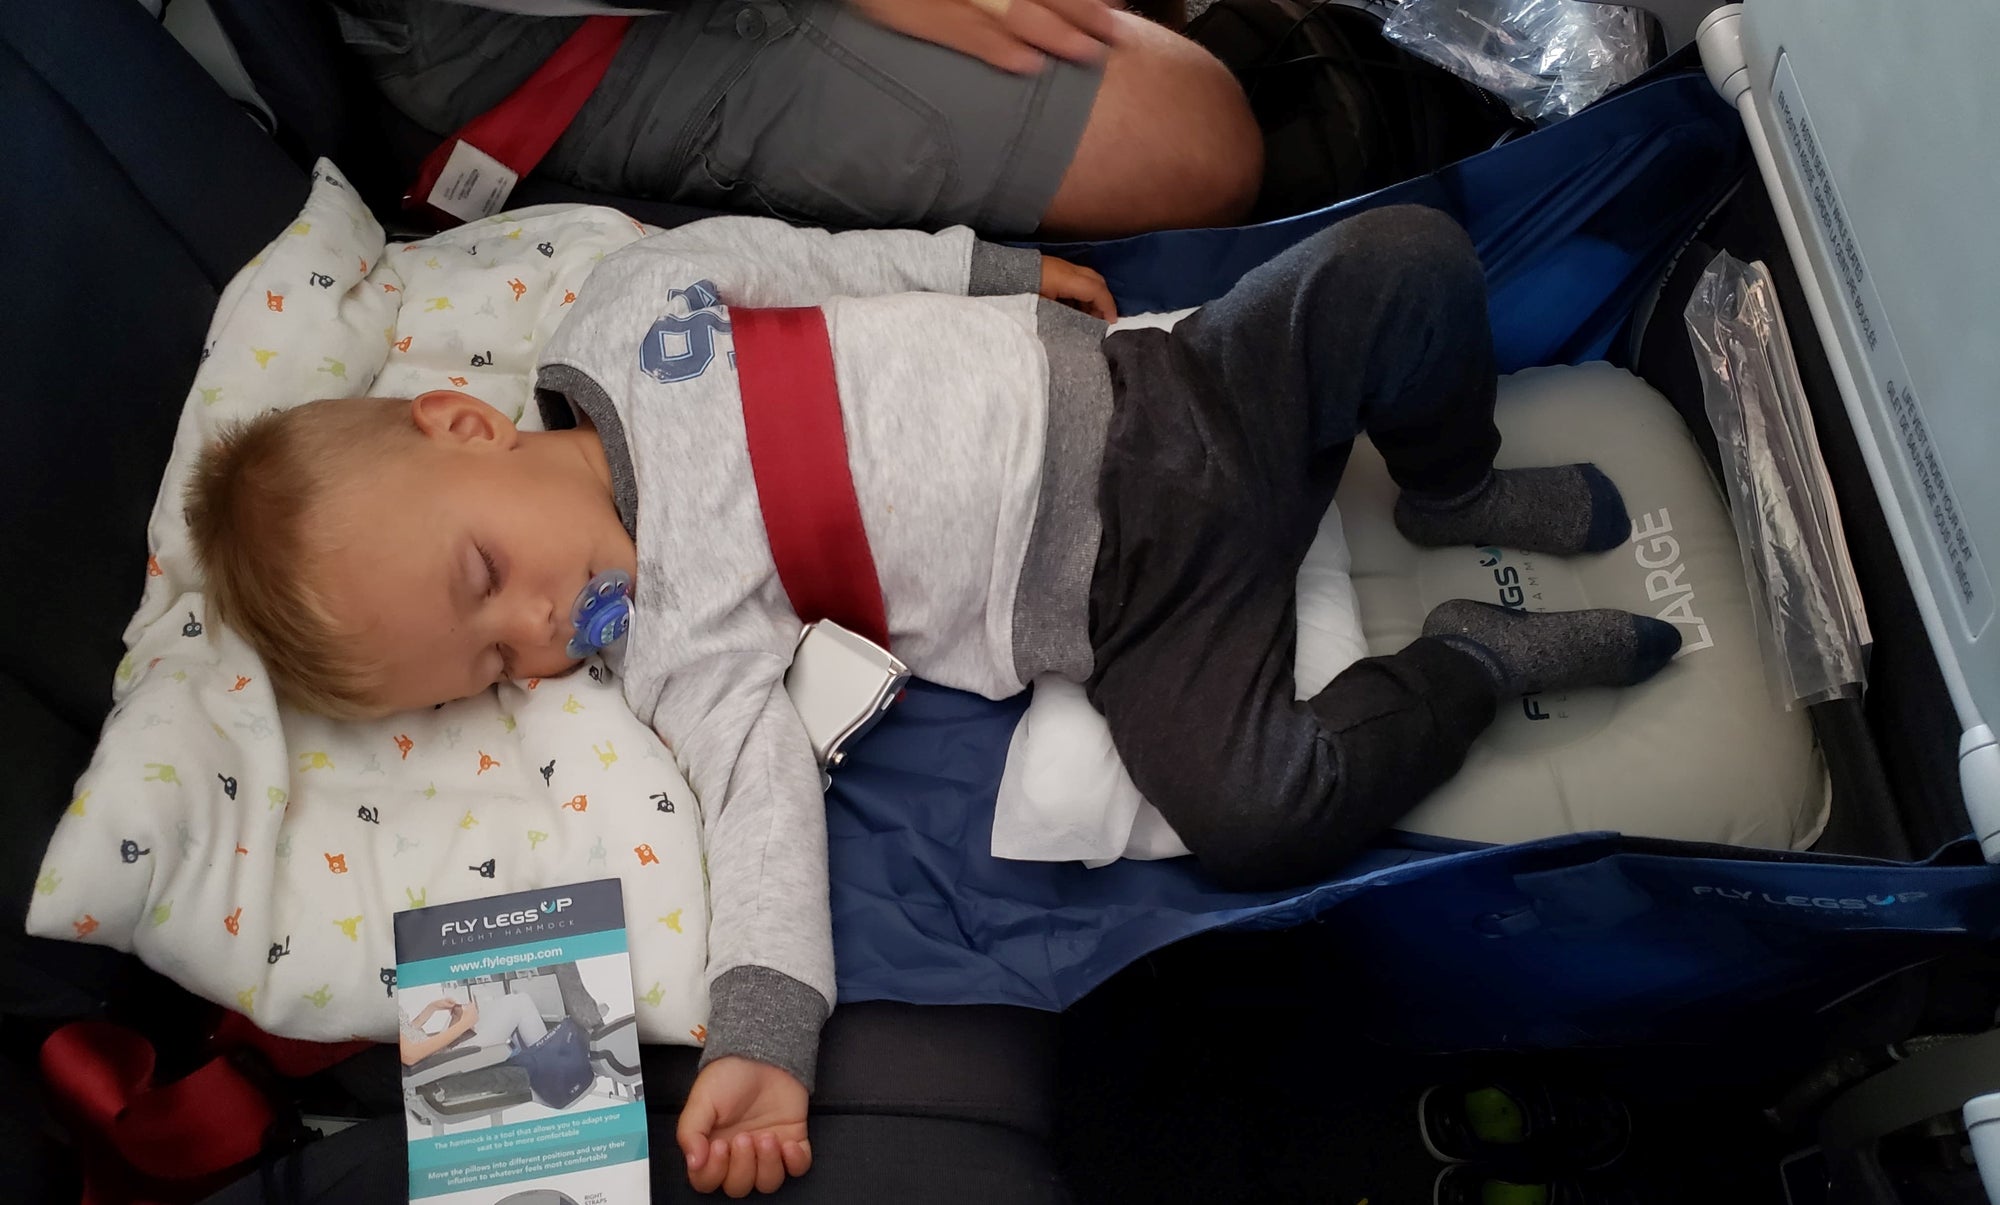 "Thank you so much!!!! 😍🤝" - Benett 2 years old, Air Canada